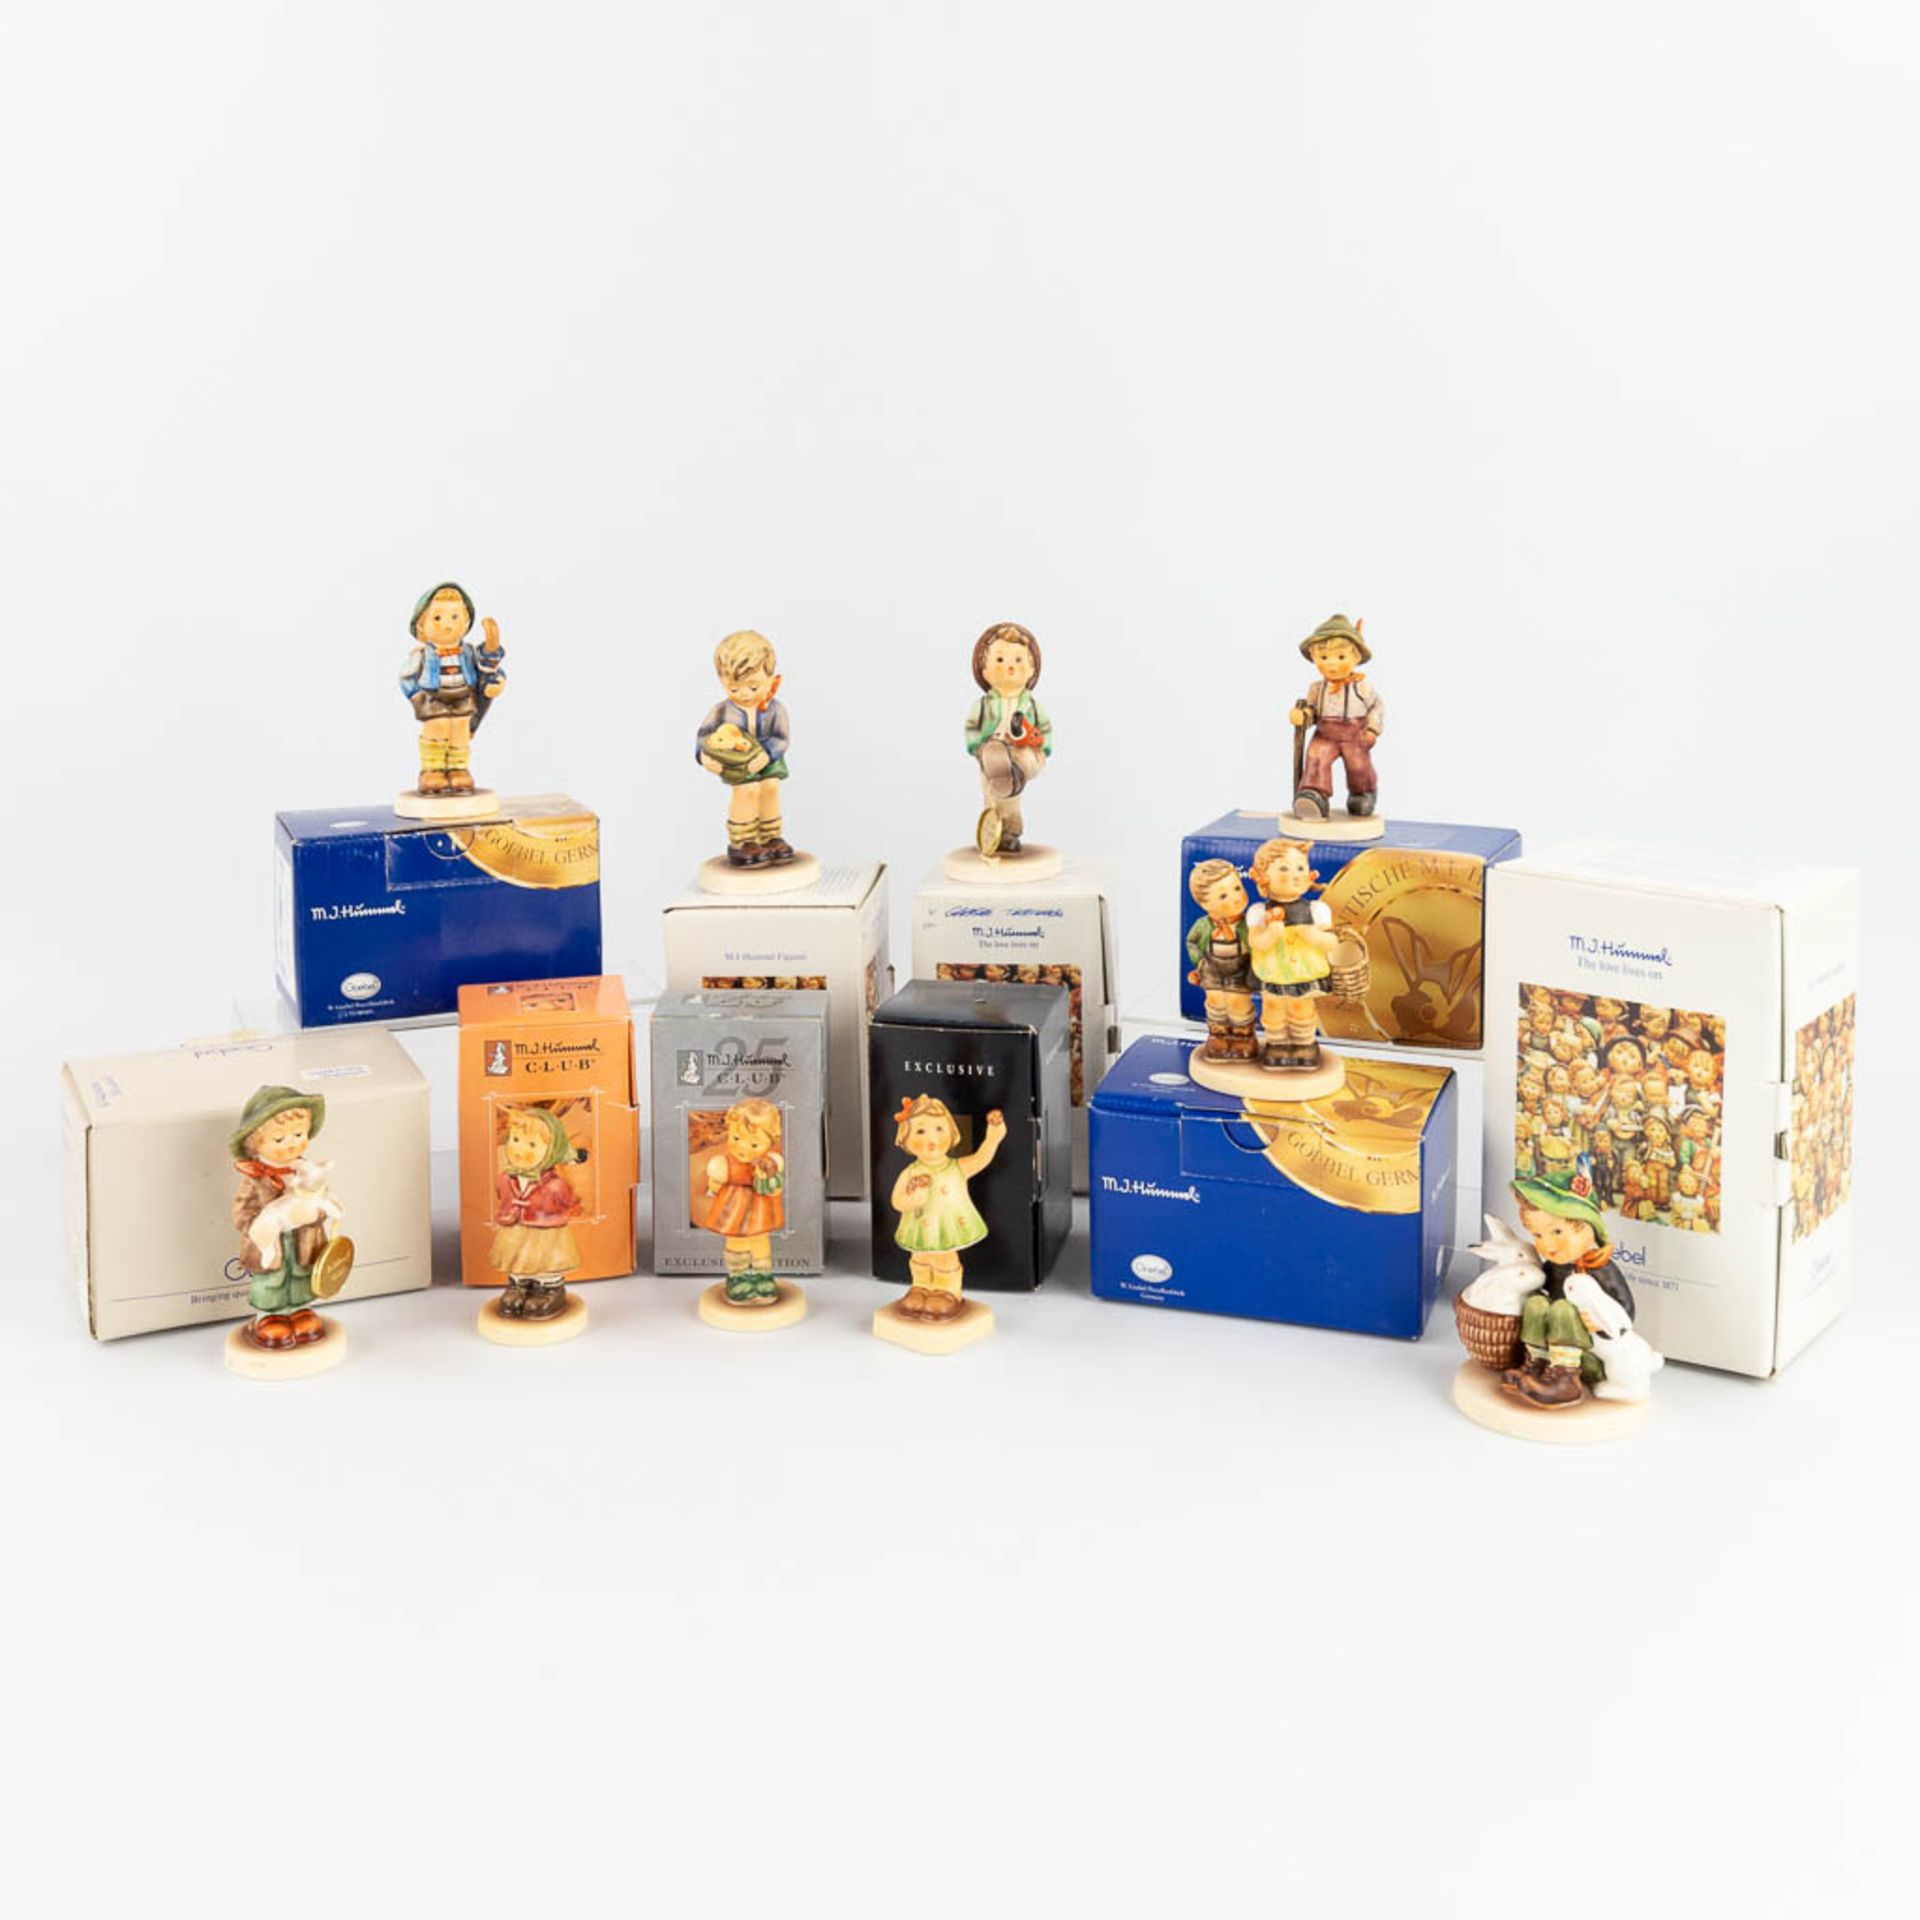 Hummel, a collection of 10 figurines in the original boxes. (H: 13 cm)